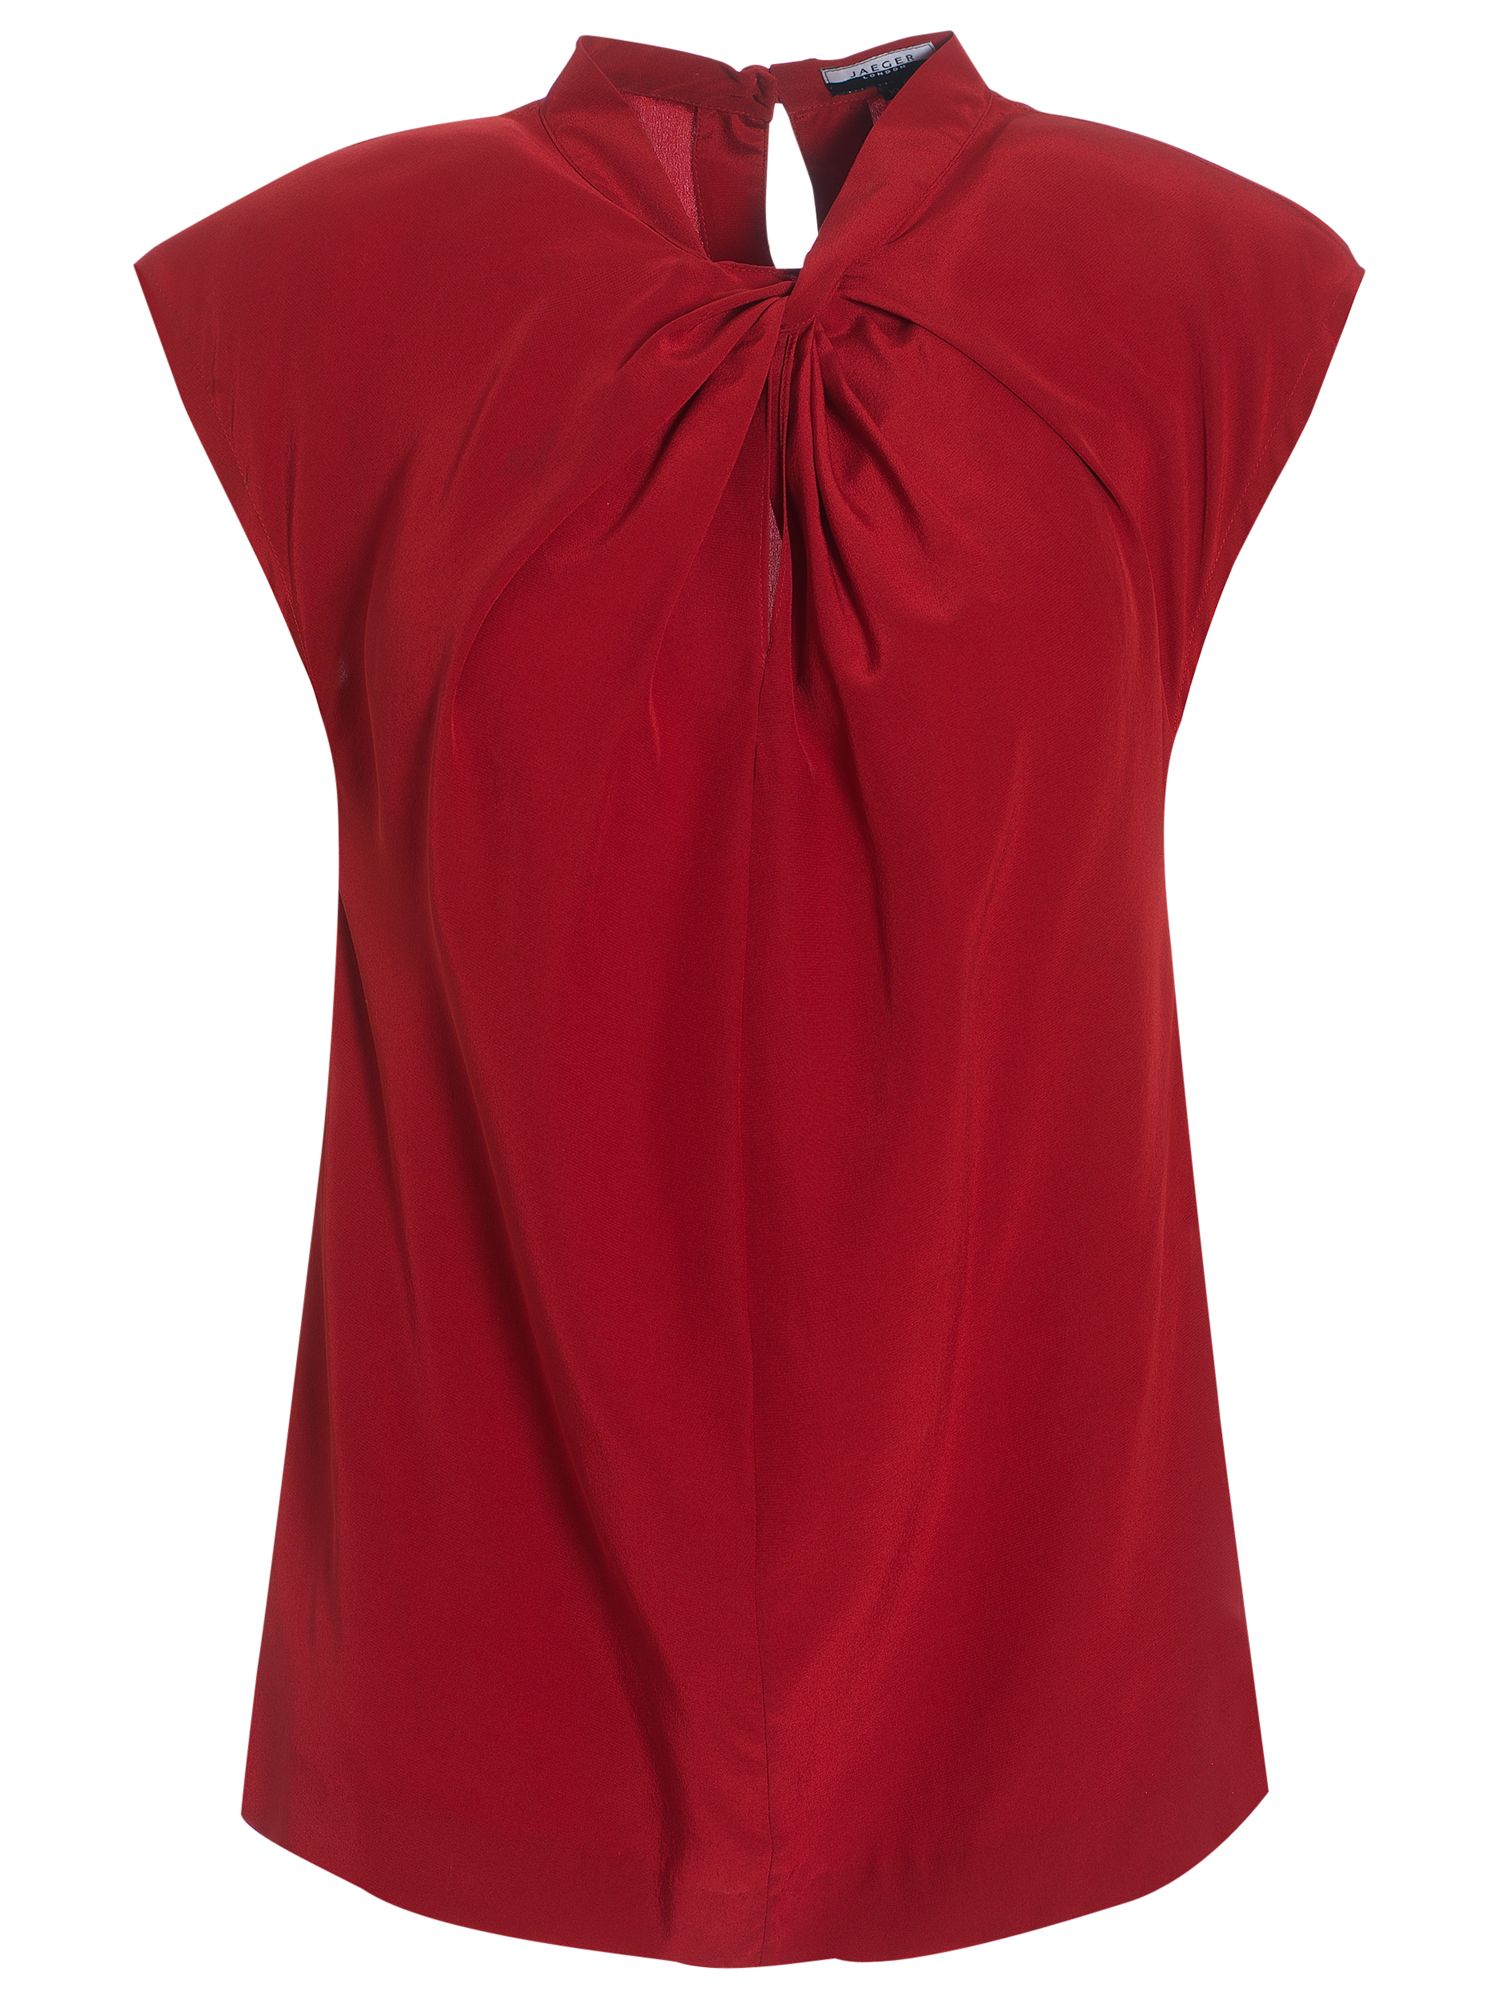 Jaeger London Knot Front Blouse, Red